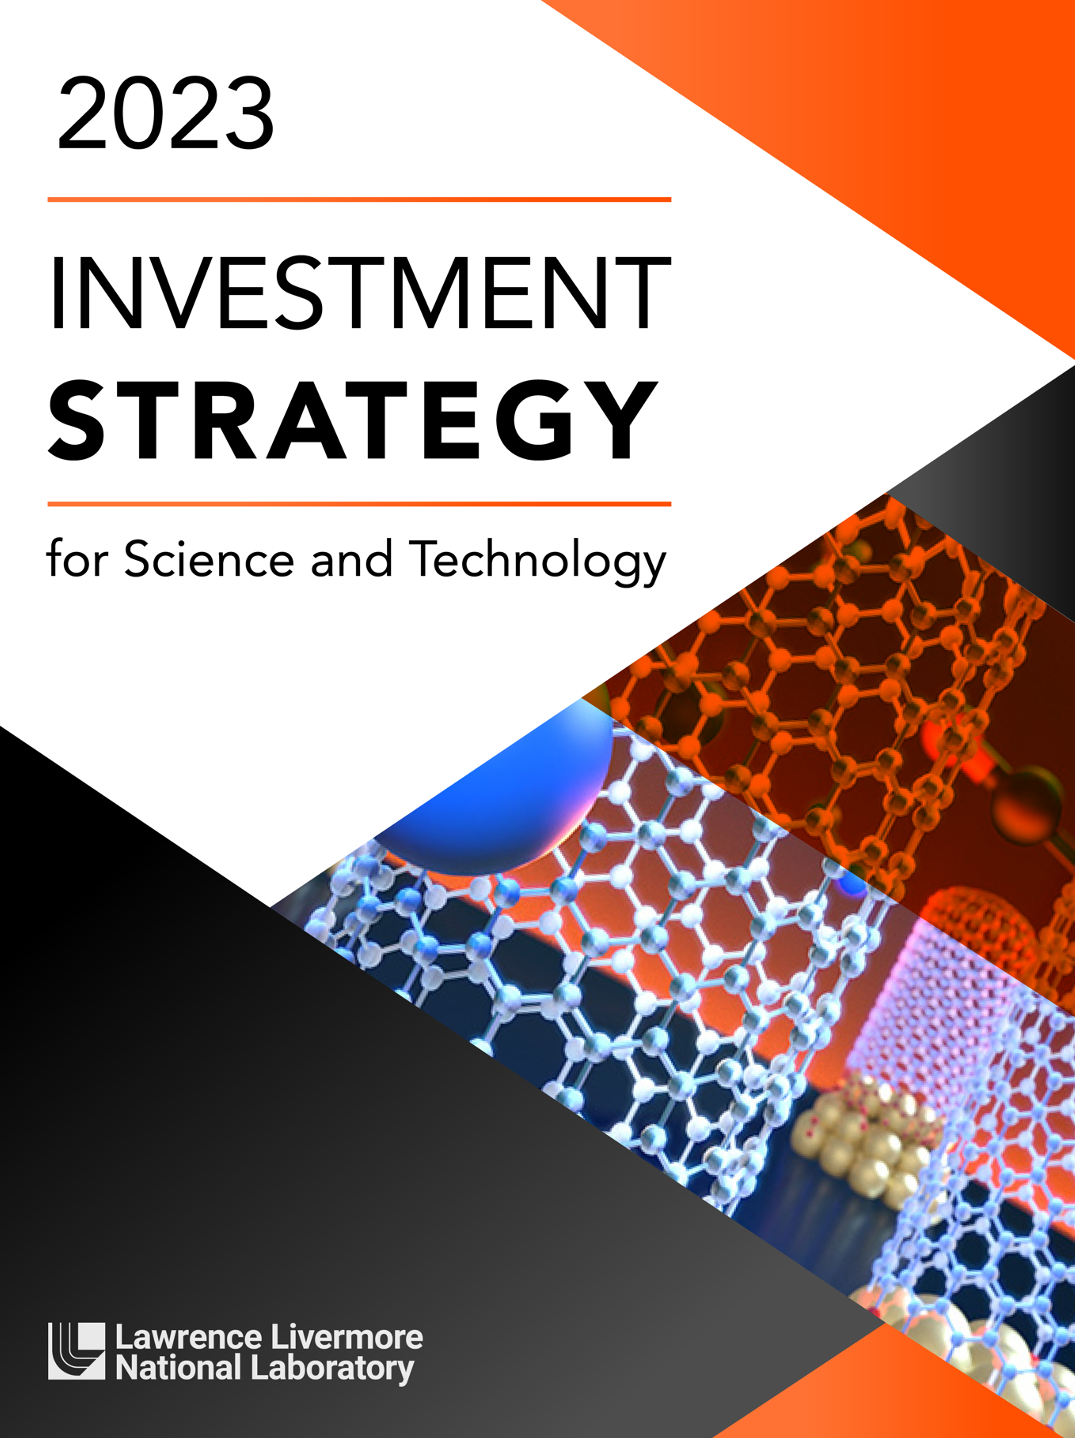 2023 Investment Strategy for Science and Technology